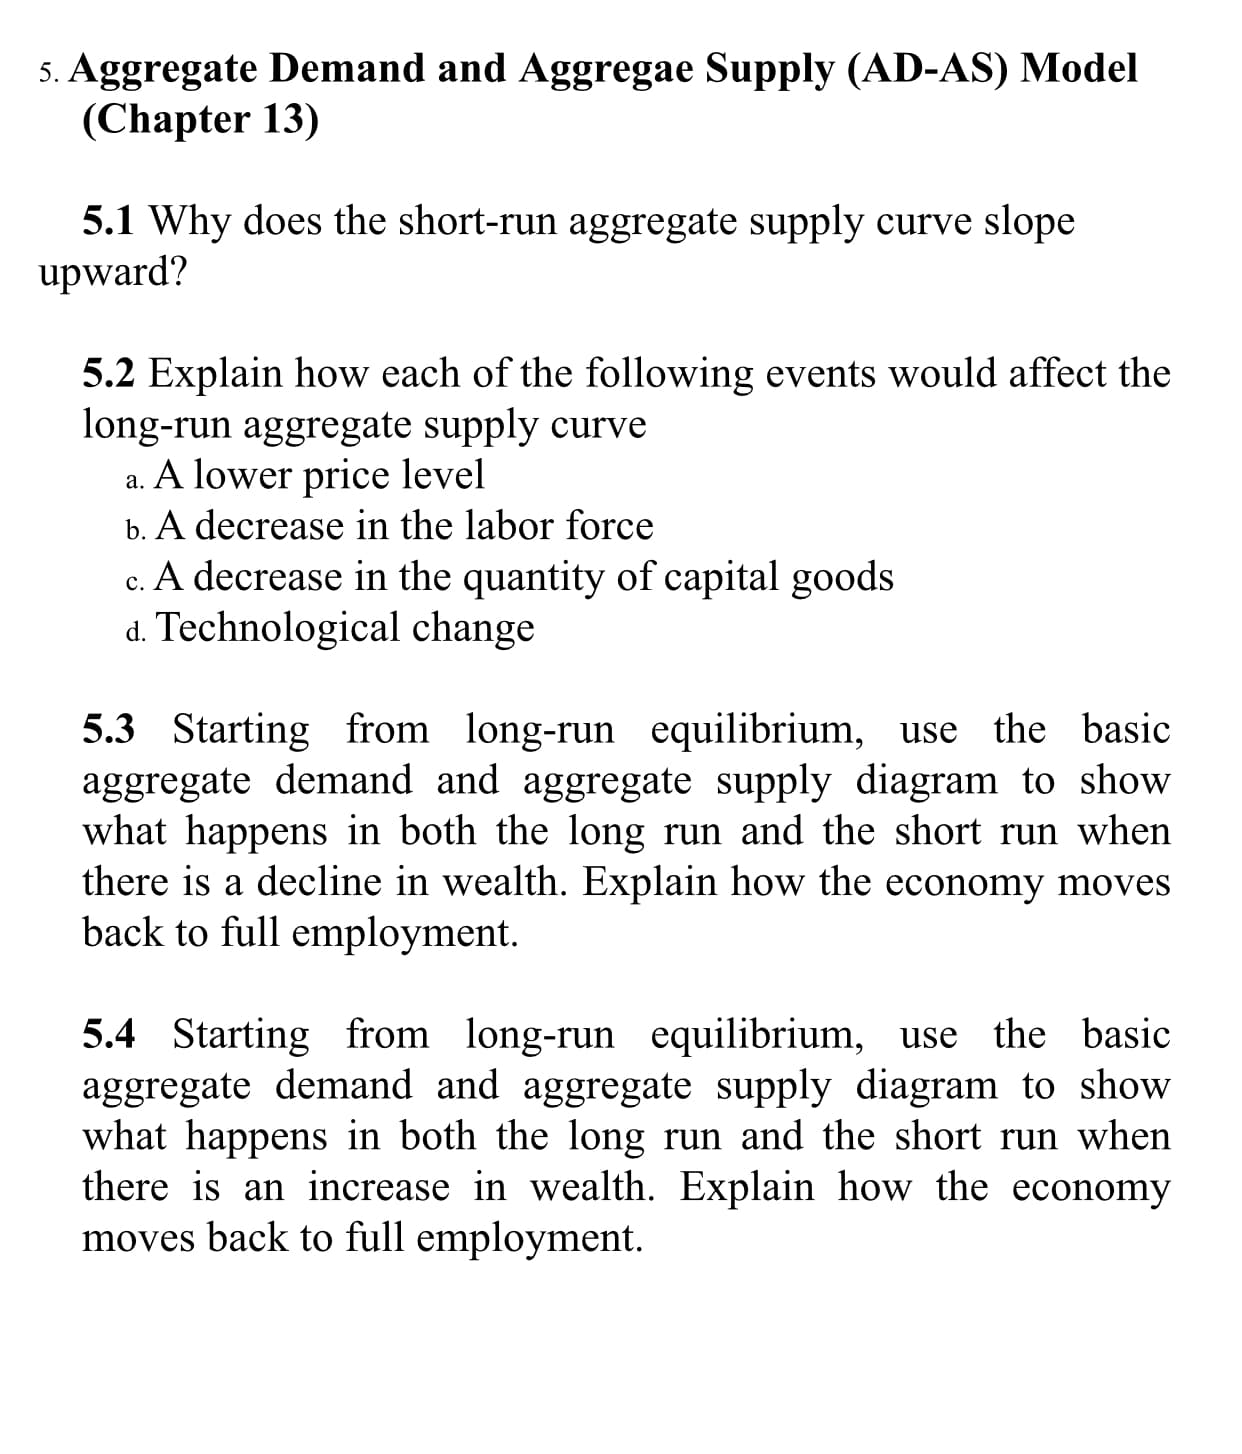 5. Aggregate Demand and Aggregae Supply (AD-AS) Model
(Chapter 13)
5.1 Why does the short-run aggregate supply curve slope
upward?
5.2 Explain how each of the following events would affect the
long-run aggregate supply curve
A lower price level
а.
b. A decrease in the labor force
c. A decrease in the quantity of capital goods
d. Technological change
5.3 Starting from long-run equilibrium, use the basic
aggregate demand and aggregate supply diagram to show
what happens in both the long run and the short run when
there is a decline in wealth. Explain how the economy moves
back to full employment
5.4 Starting from long-run equilibrium, use the basic
aggregate demand and aggregate supply diagram to show
what happens in both the long run and the short run when
there is an increase in wealth. Explain how the economy
moves back to full employment
